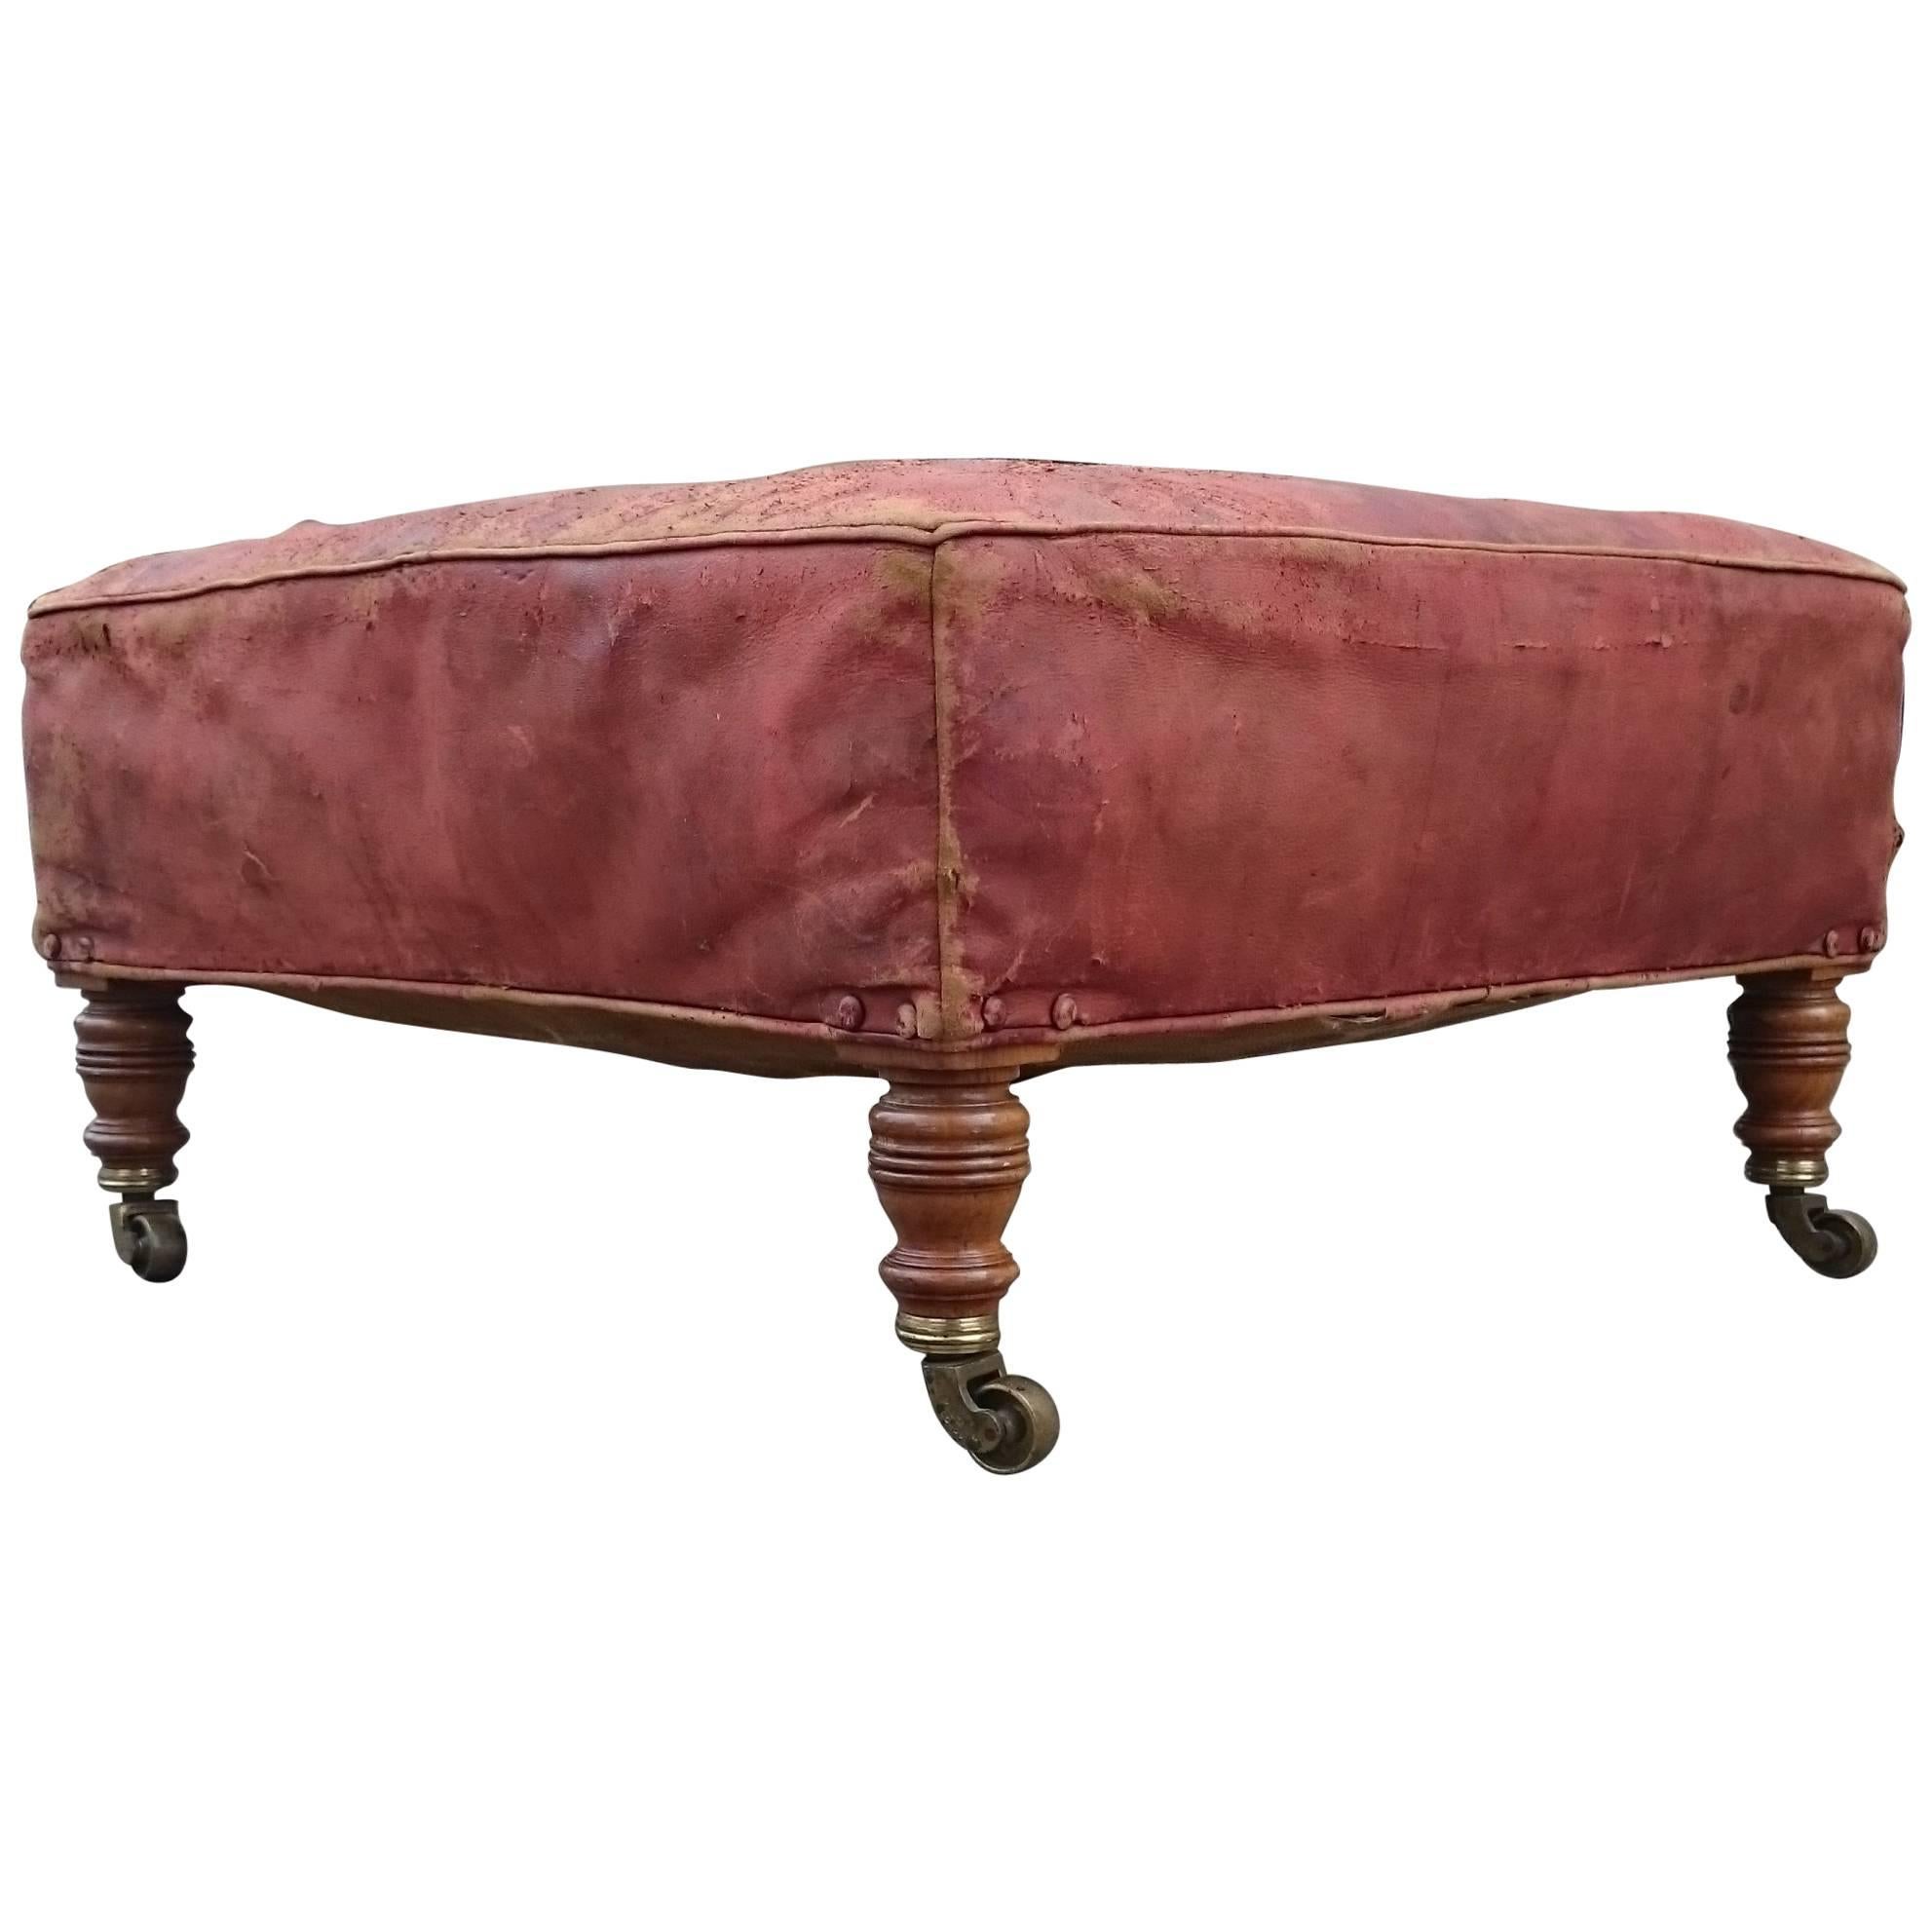 Antique Upholstered Footstool Made by Howard and Sons of London